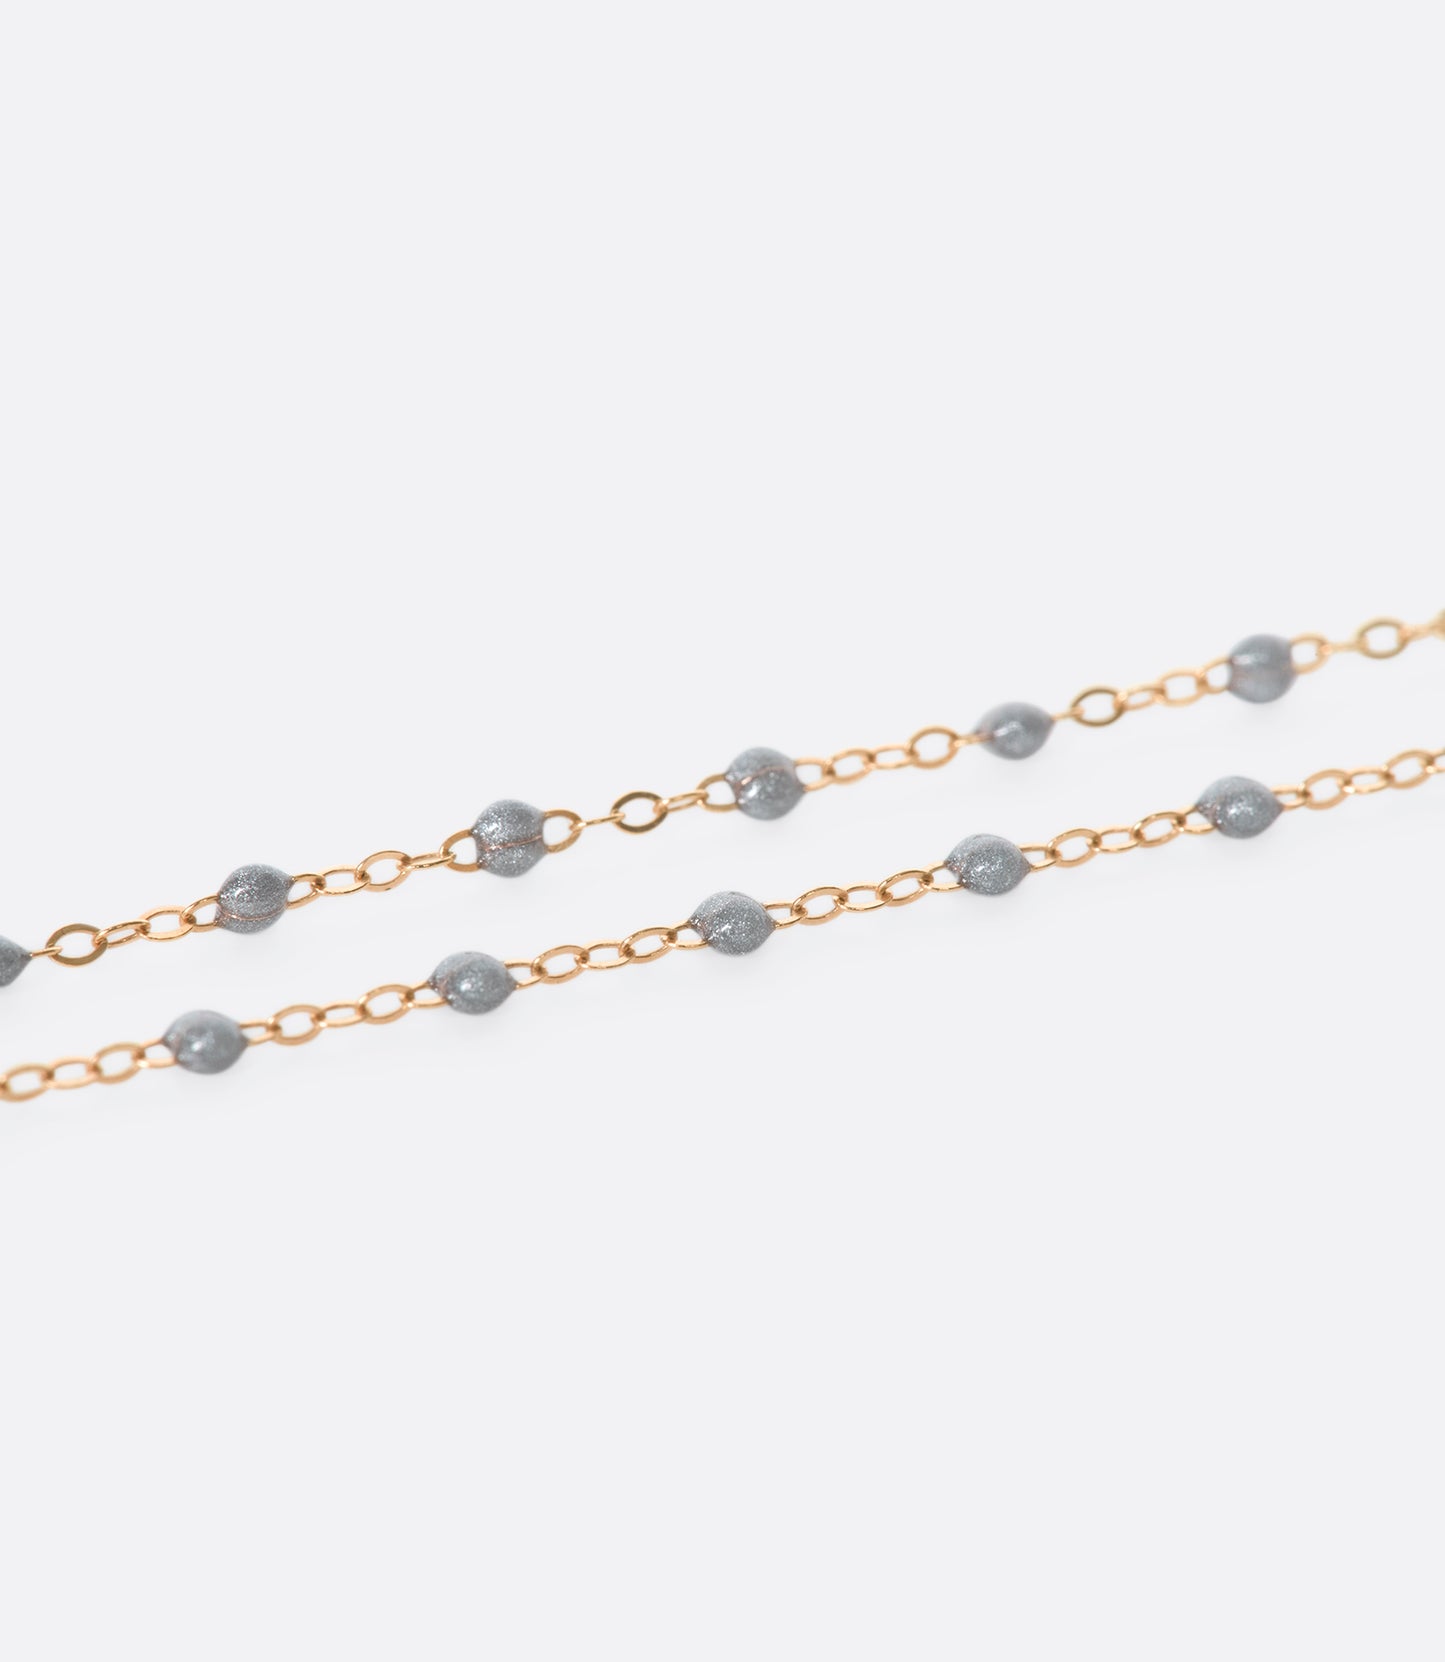 A thin rose gold chain necklace with resin beads. Each necklace is hand dipped in melted resin to create the beaded effect. 